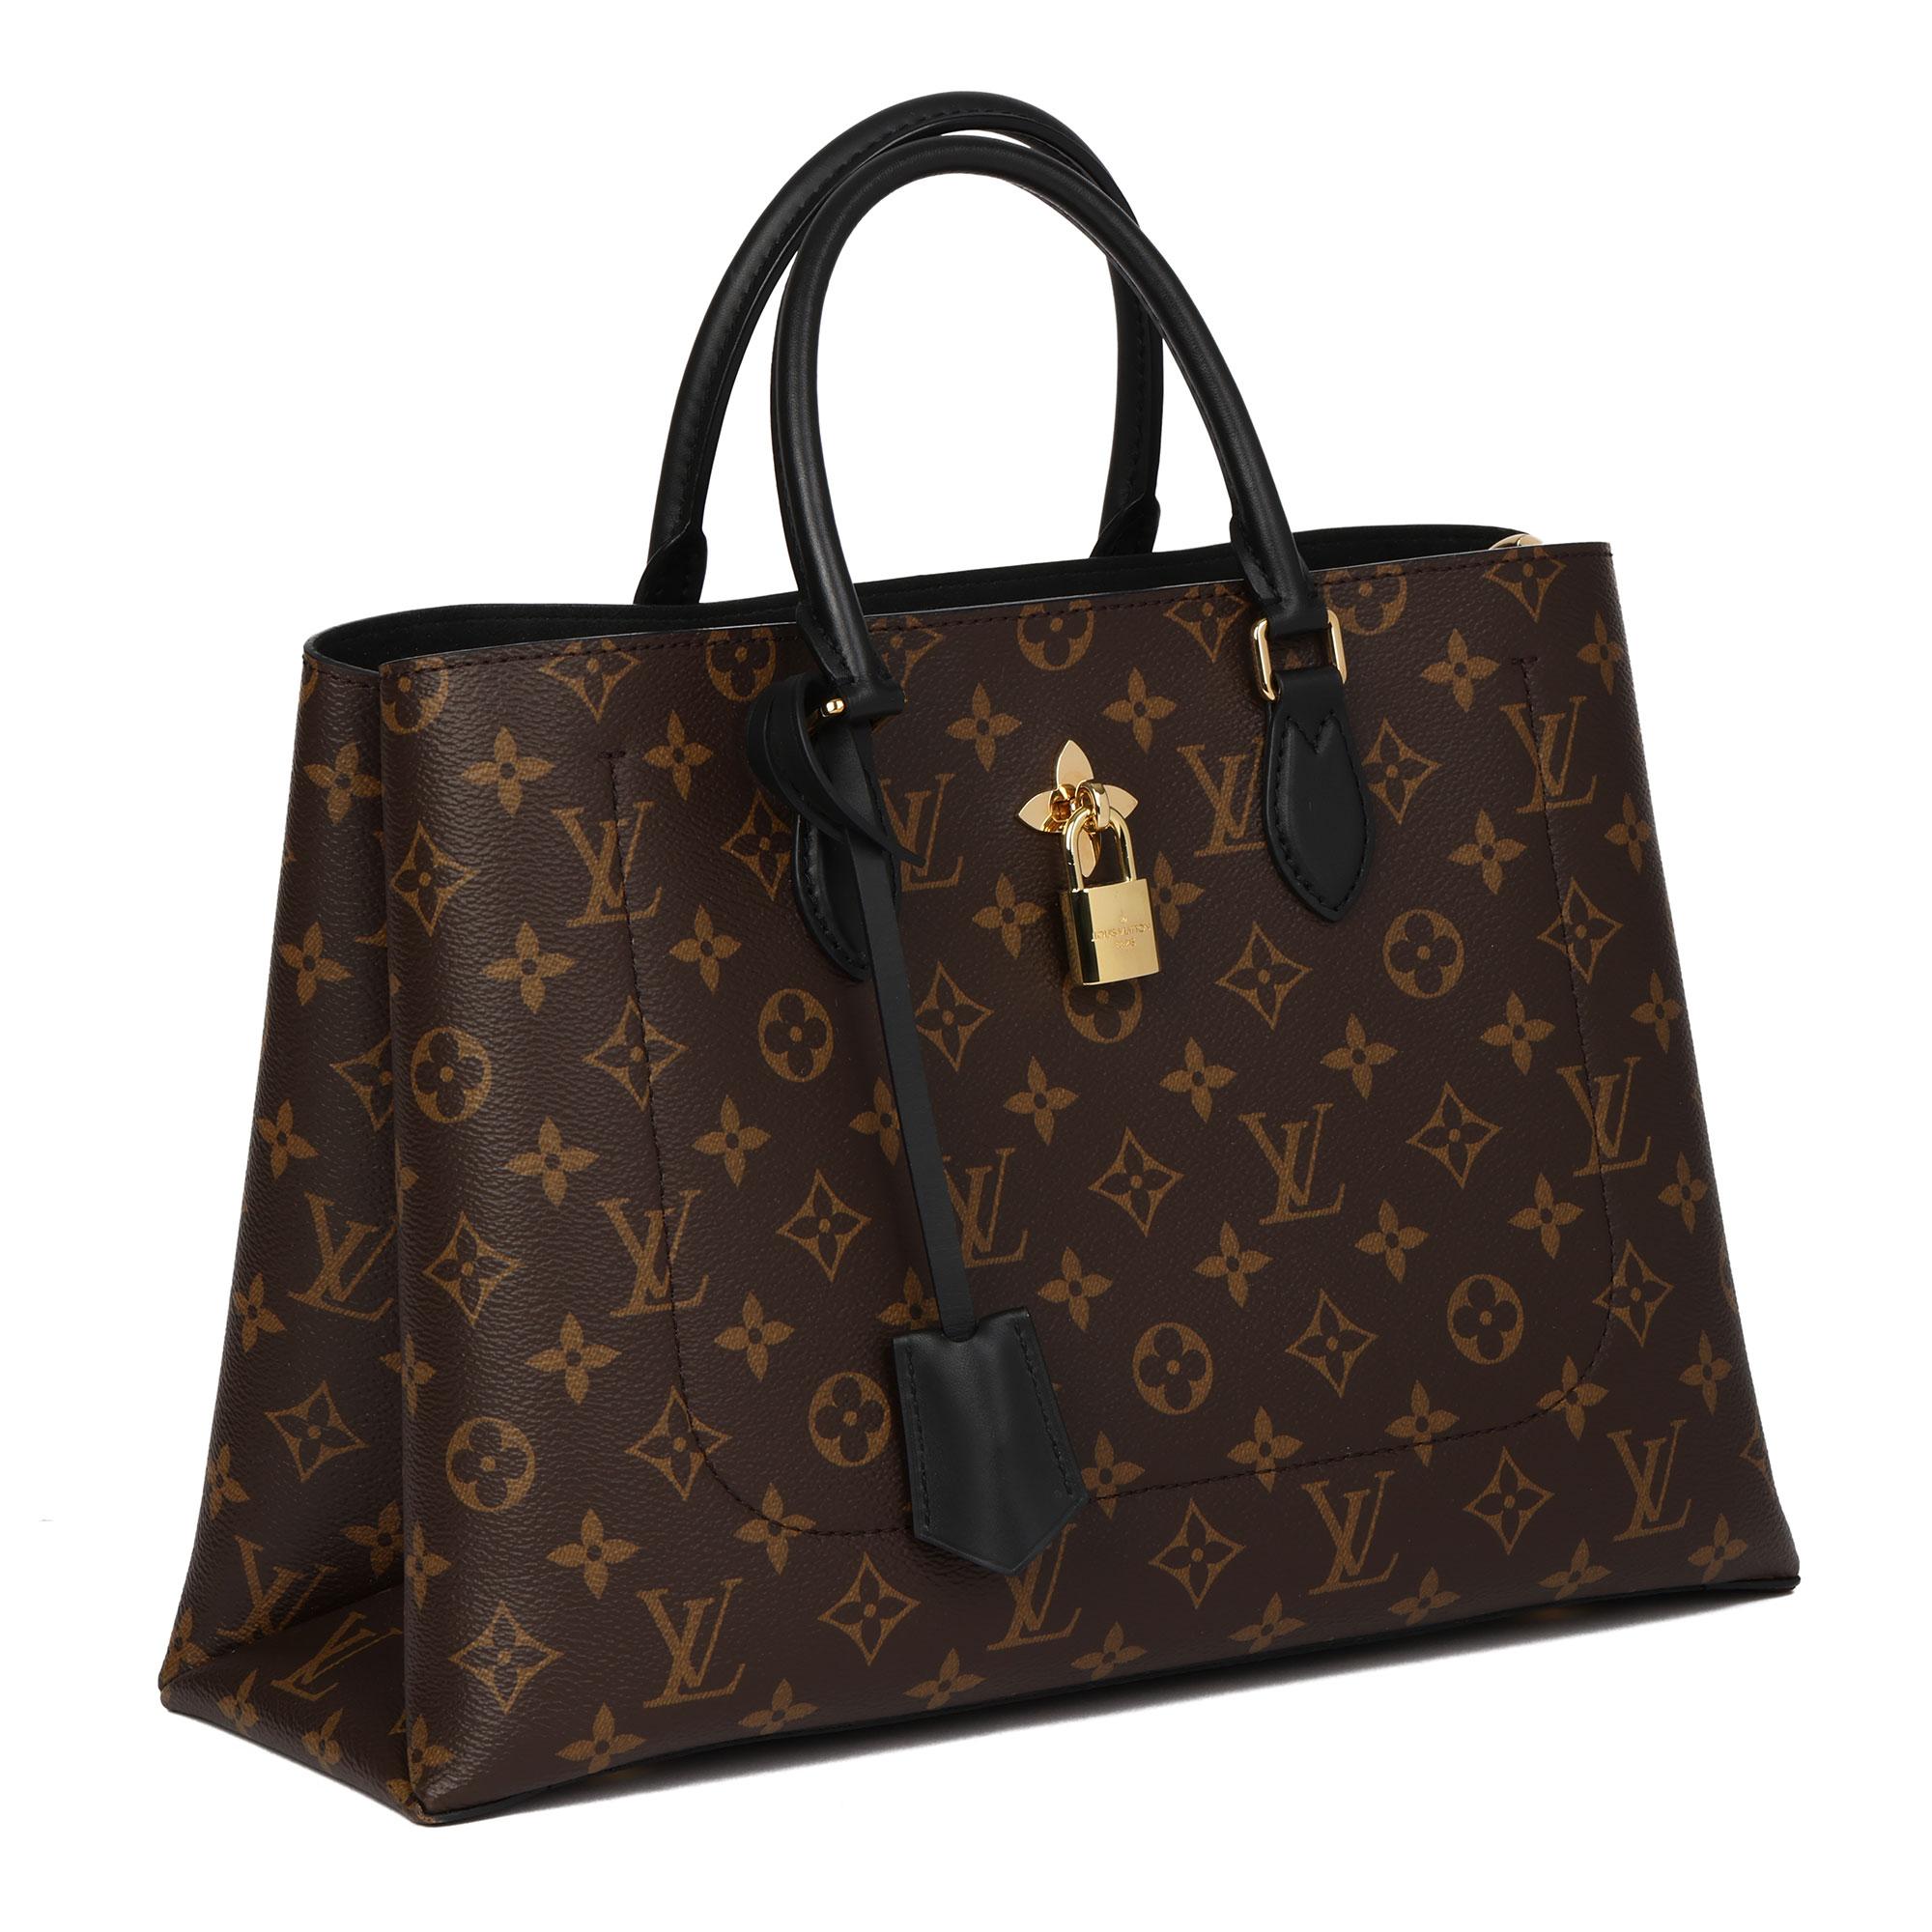 LOUIS VUITTON
Brown Monogram Coated Canvas & Black Calfskin Leather Flower Tote

Serial Number: AH3149
Age (Circa): 2019
Accompanied By: Louis Vuitton Dust Bag, Box, Care Booklet, Shoulder Strap, Lock, Keys, Clochette
Authenticity Details: Date